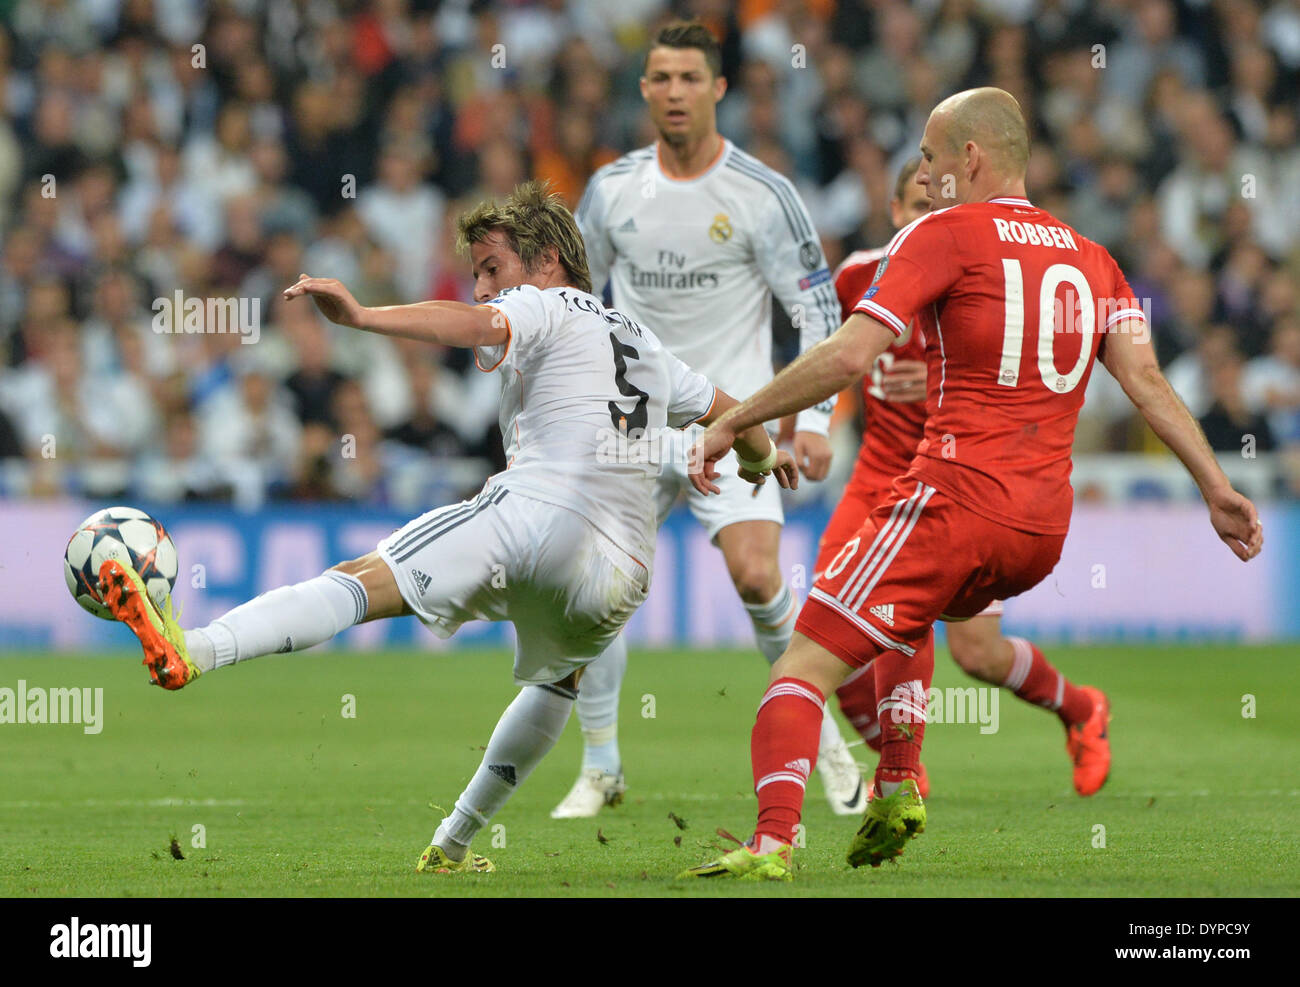 Munich's Arjen Robben (r) fights for the ball with Fabio Coentrao of Real Madrid during the UEFA Champions League semi final first leg soccer match between Real Madrid and FC Bayern Munich at Santiago Bernabeu stadium in Madrid, Spain, on 23 April 2014. Photo: Peter Kneffel/dpa Stock Photo